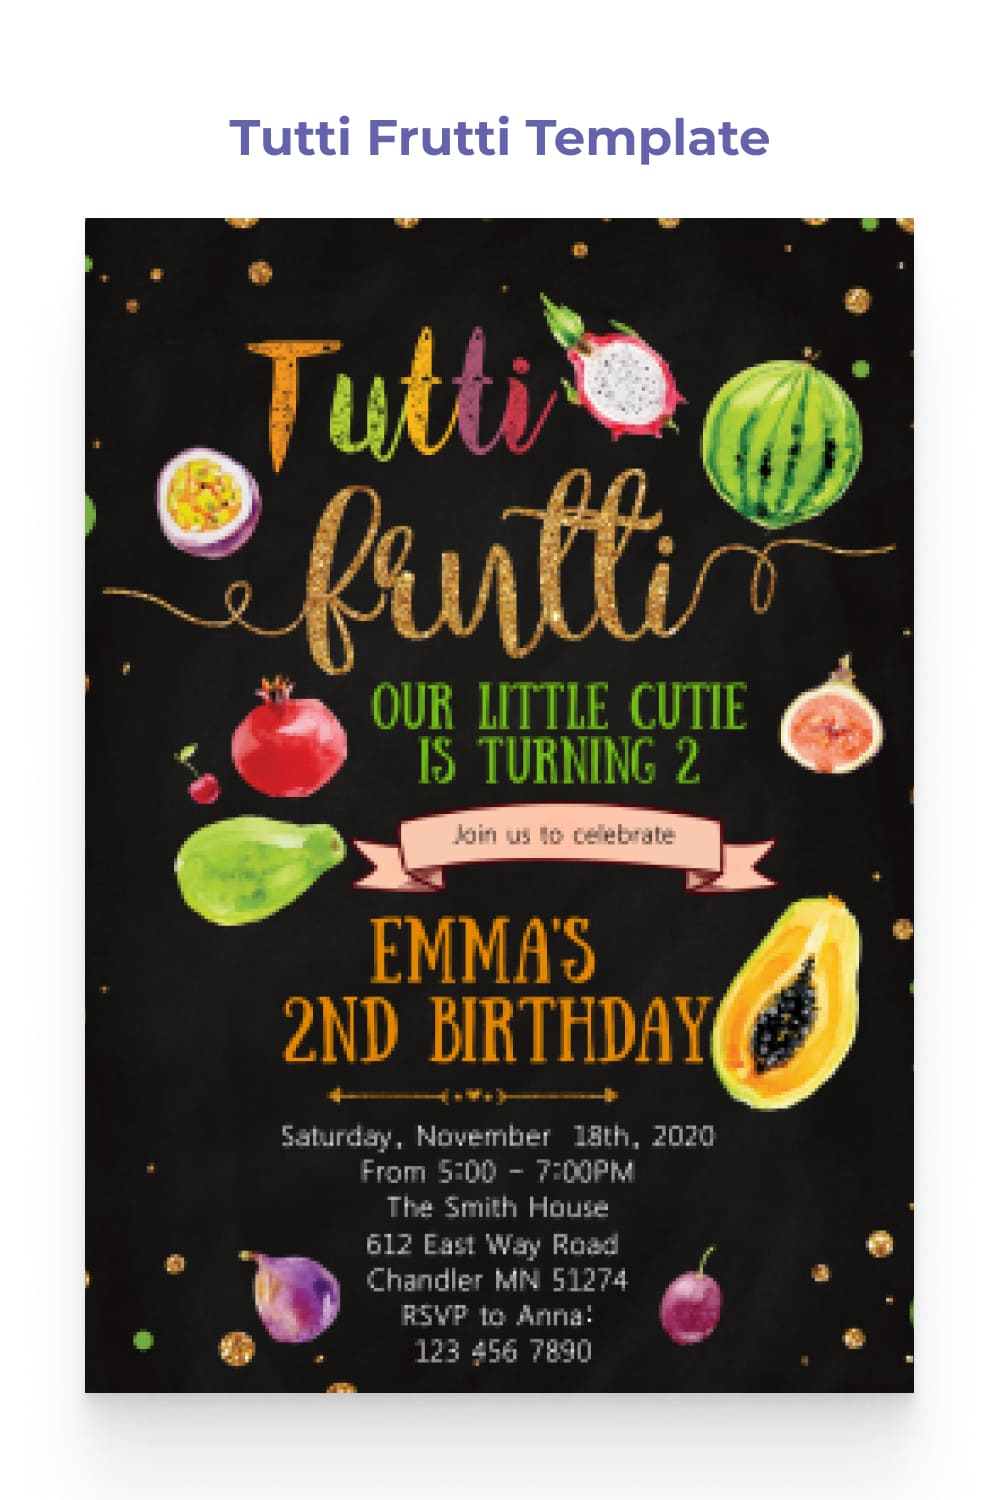 Birthday invitation with black background and fruit images.